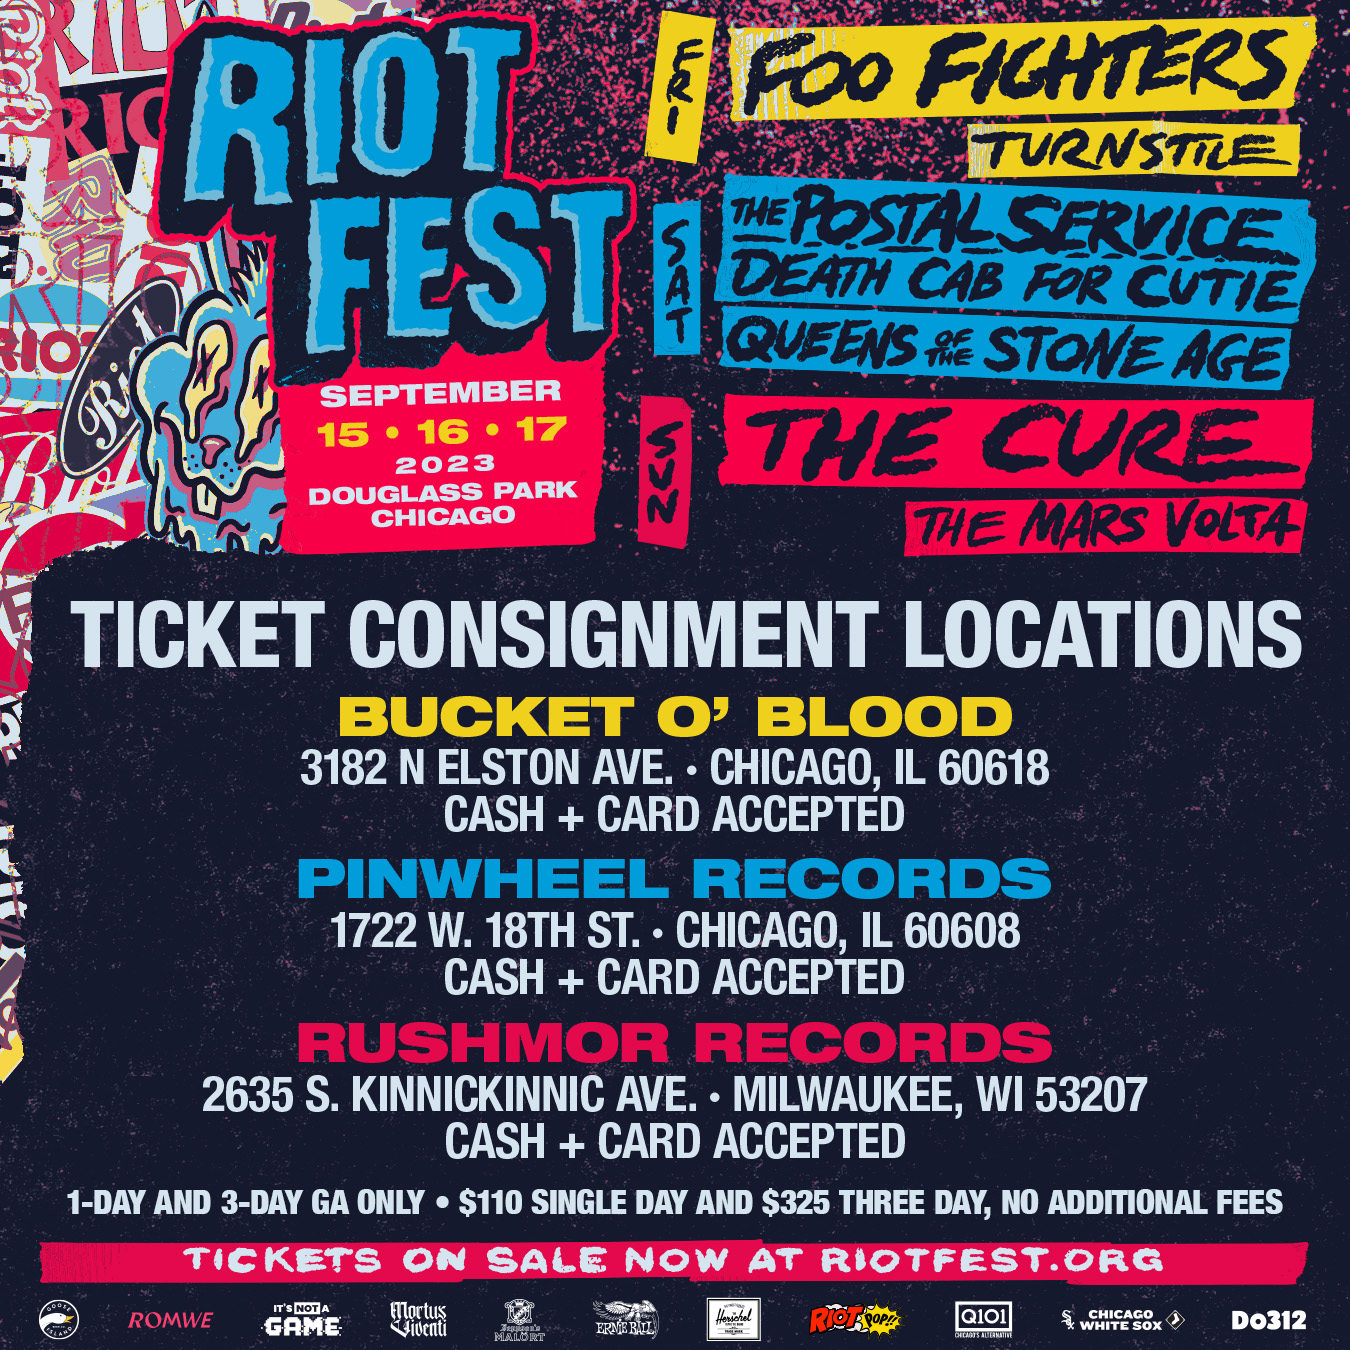 Check Out The Riot Fest 2023 Merch + Preorder Some Items Today